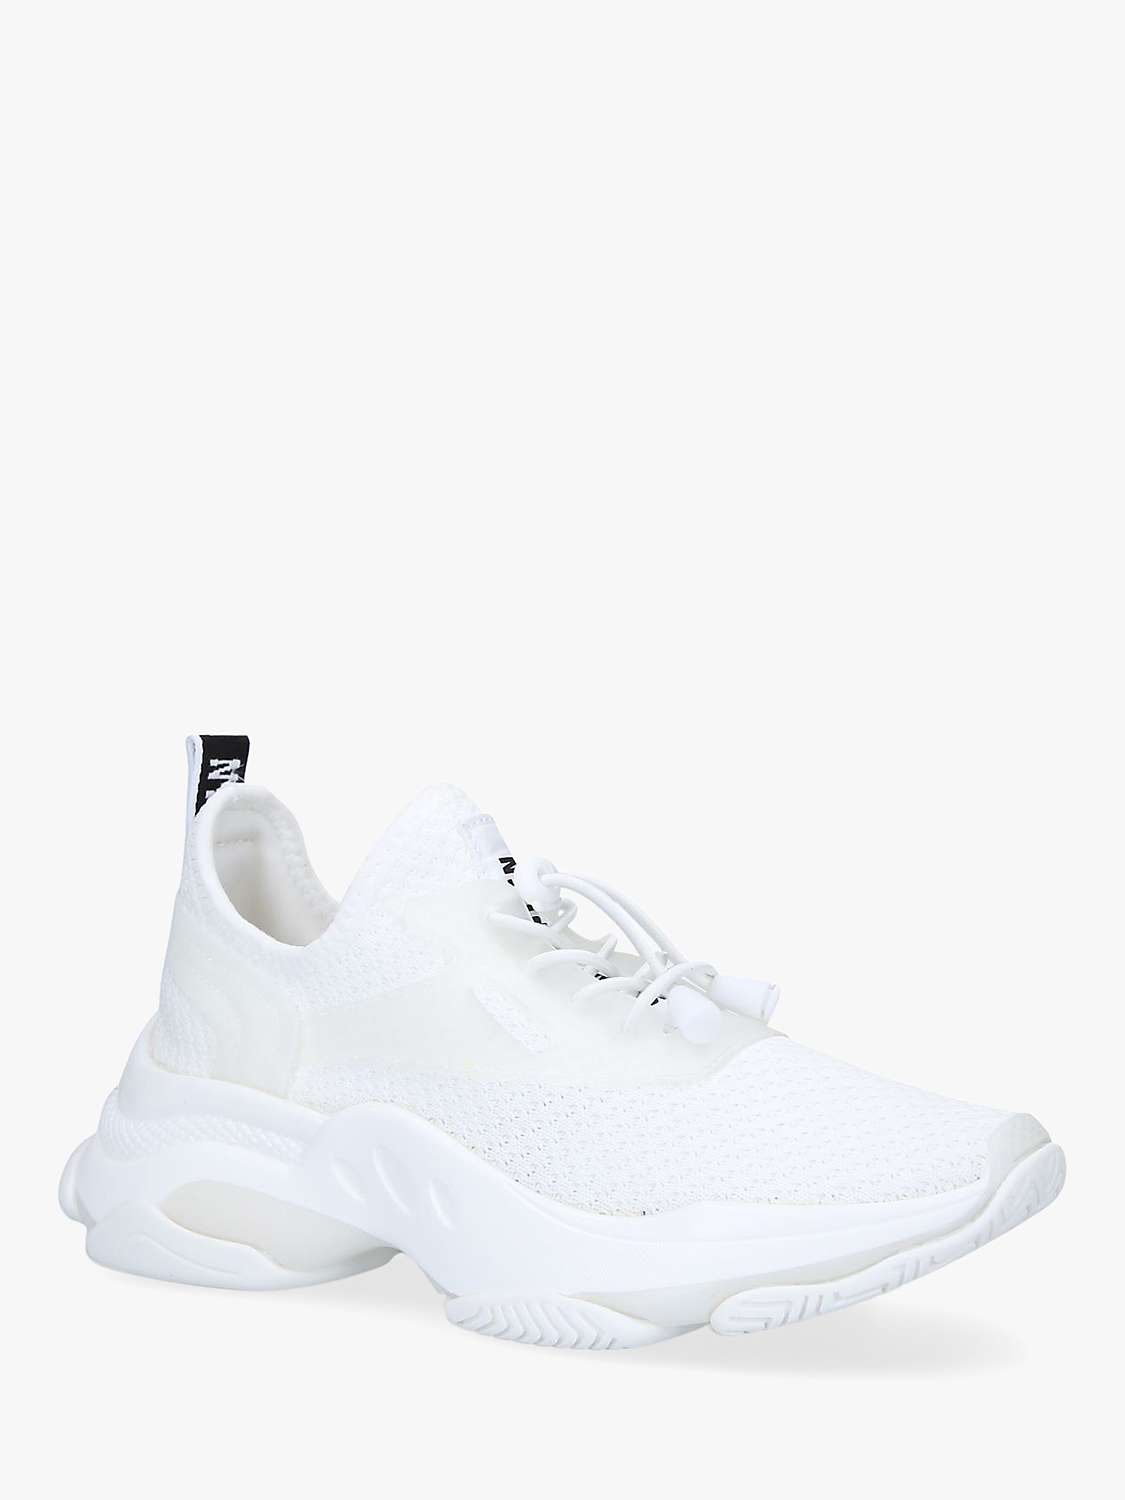 Buy Steve Madden Match Chunky Sole Trainers Online at johnlewis.com